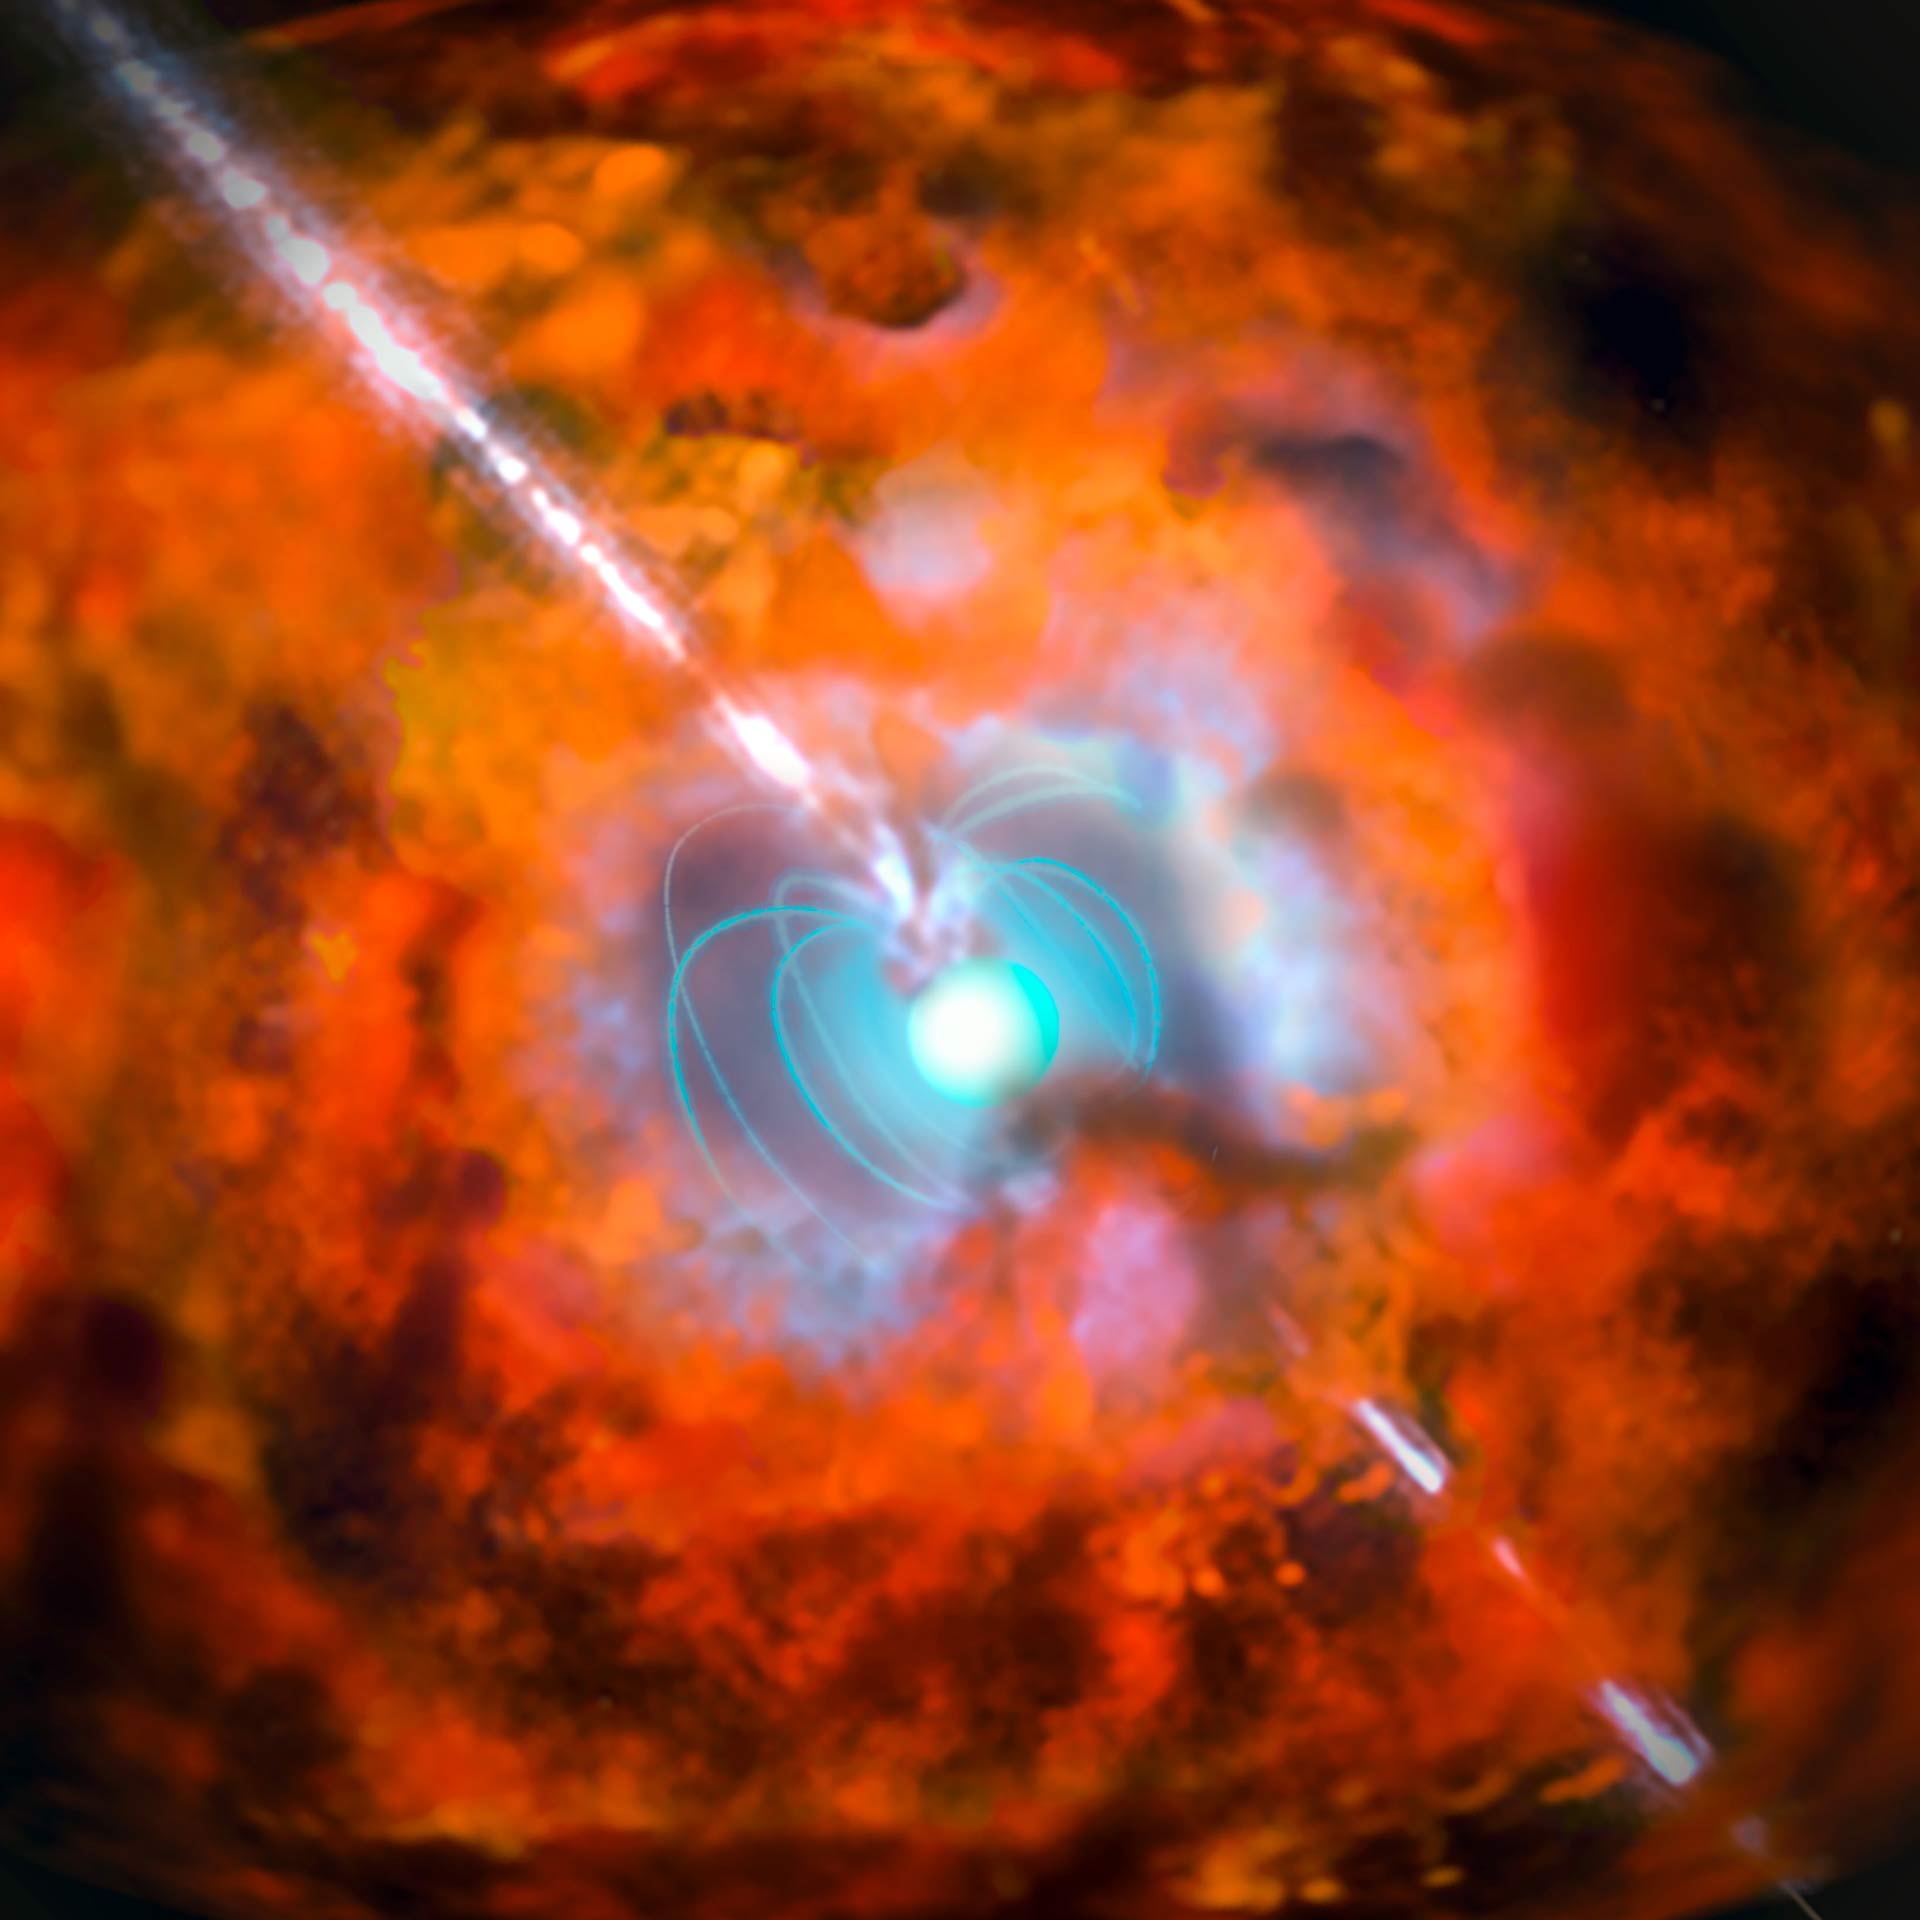 Artist’s impression of a supernova and associated gamma-ray burst driven by rapidly spinning magnetar, a neutron star with a very strong magnetic field. Credit: ESO - http://www.eso.org/public/images/eso1527a/